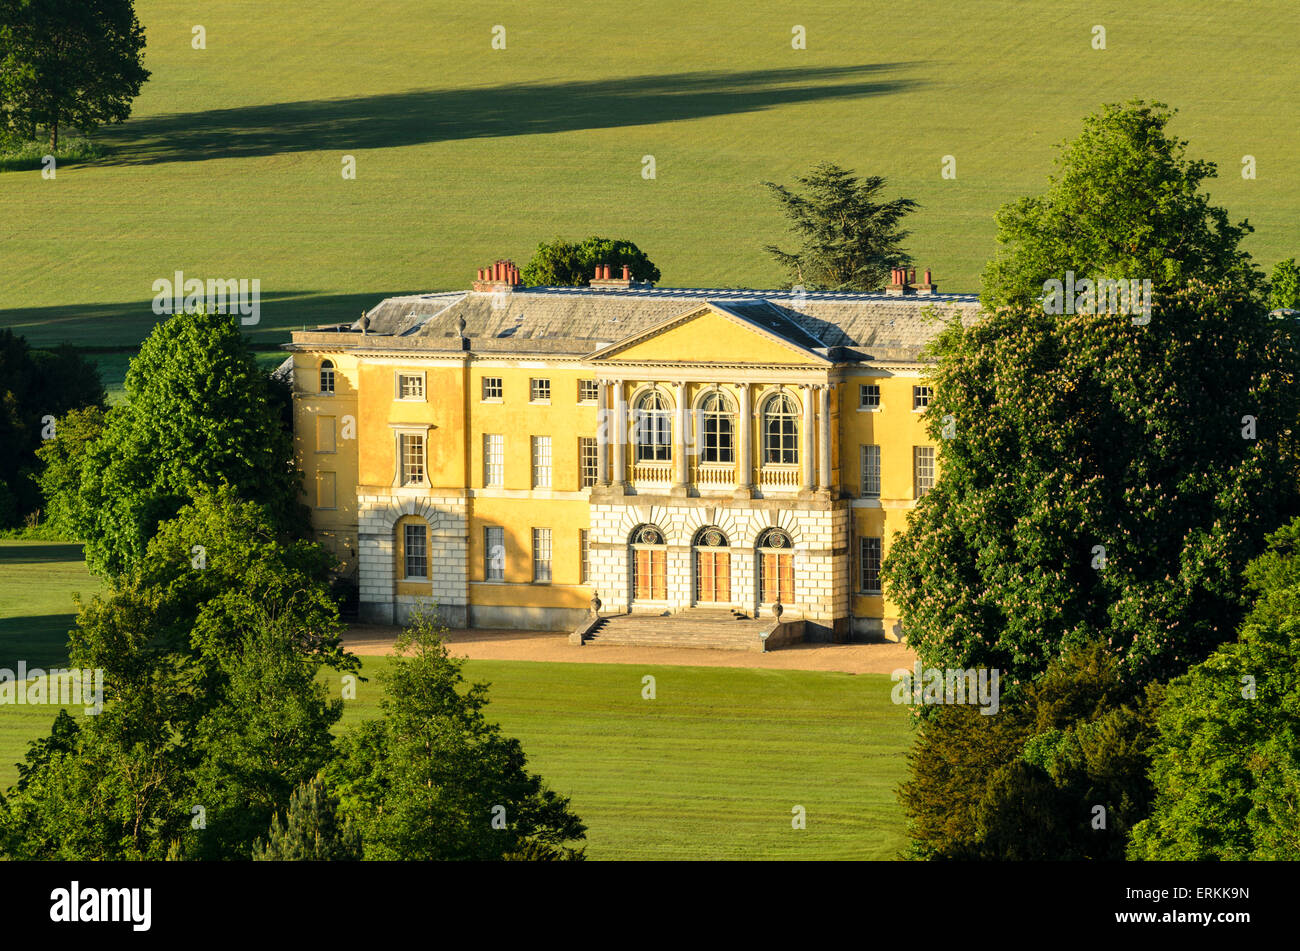 West Wycombe House. Built in the 18th Century, Grade1 Listed Building, home of The Dashwood Family, owned by The National Trust. Stock Photo